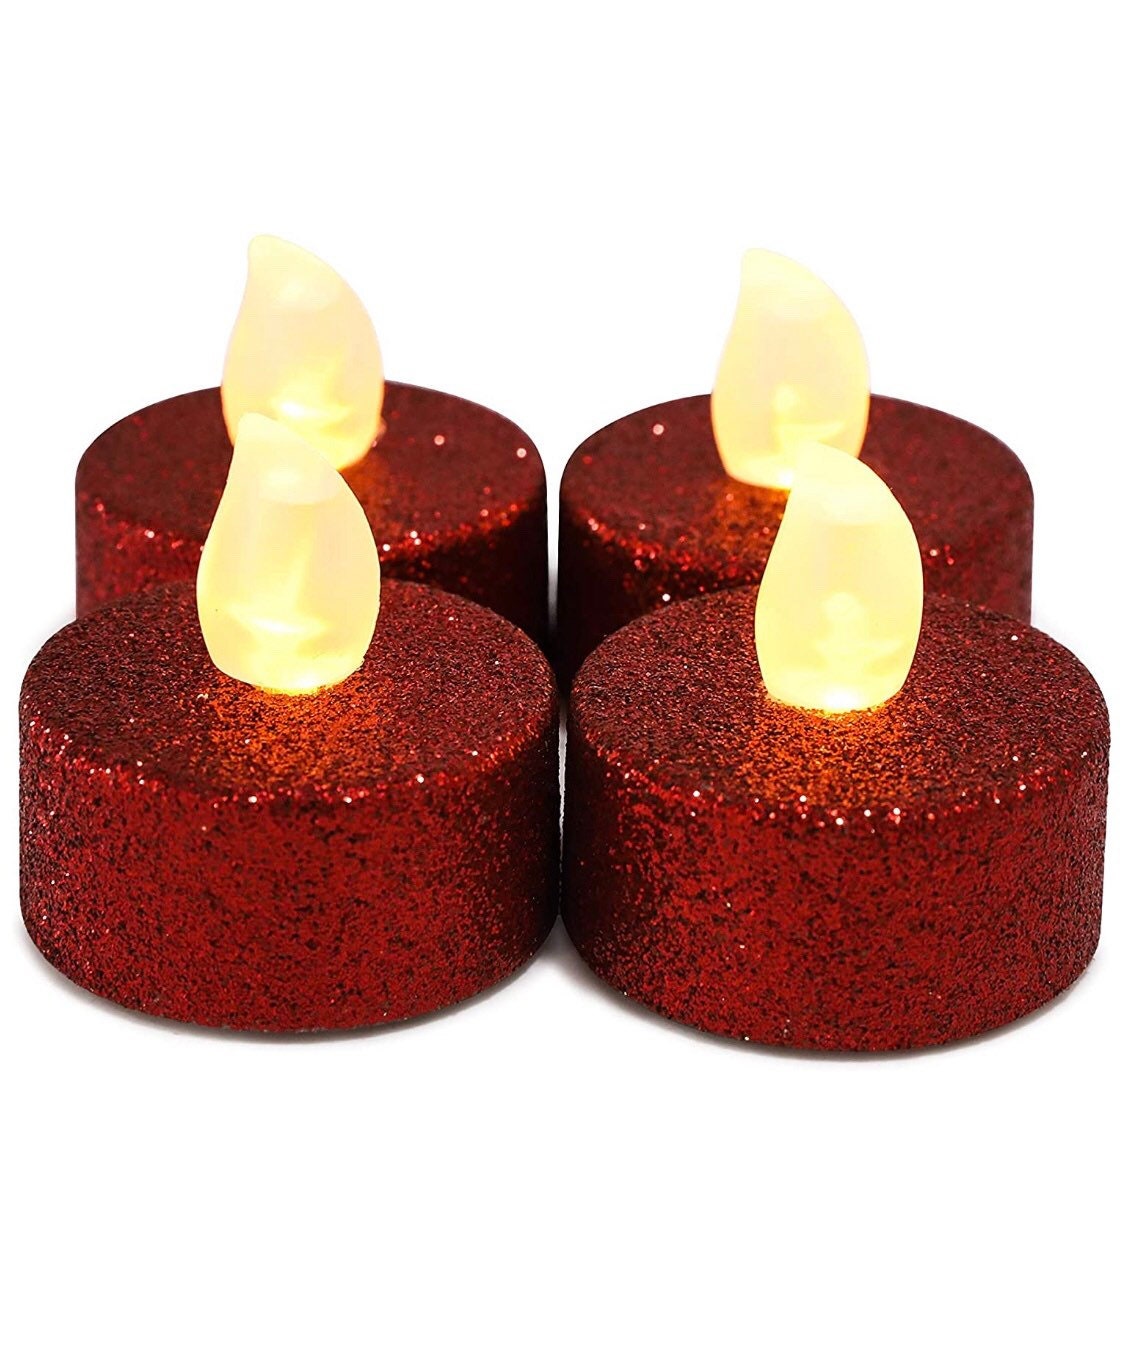 Festive Nights: LED Glitter Candle  Flameless & Color Changing! • Showcase  US